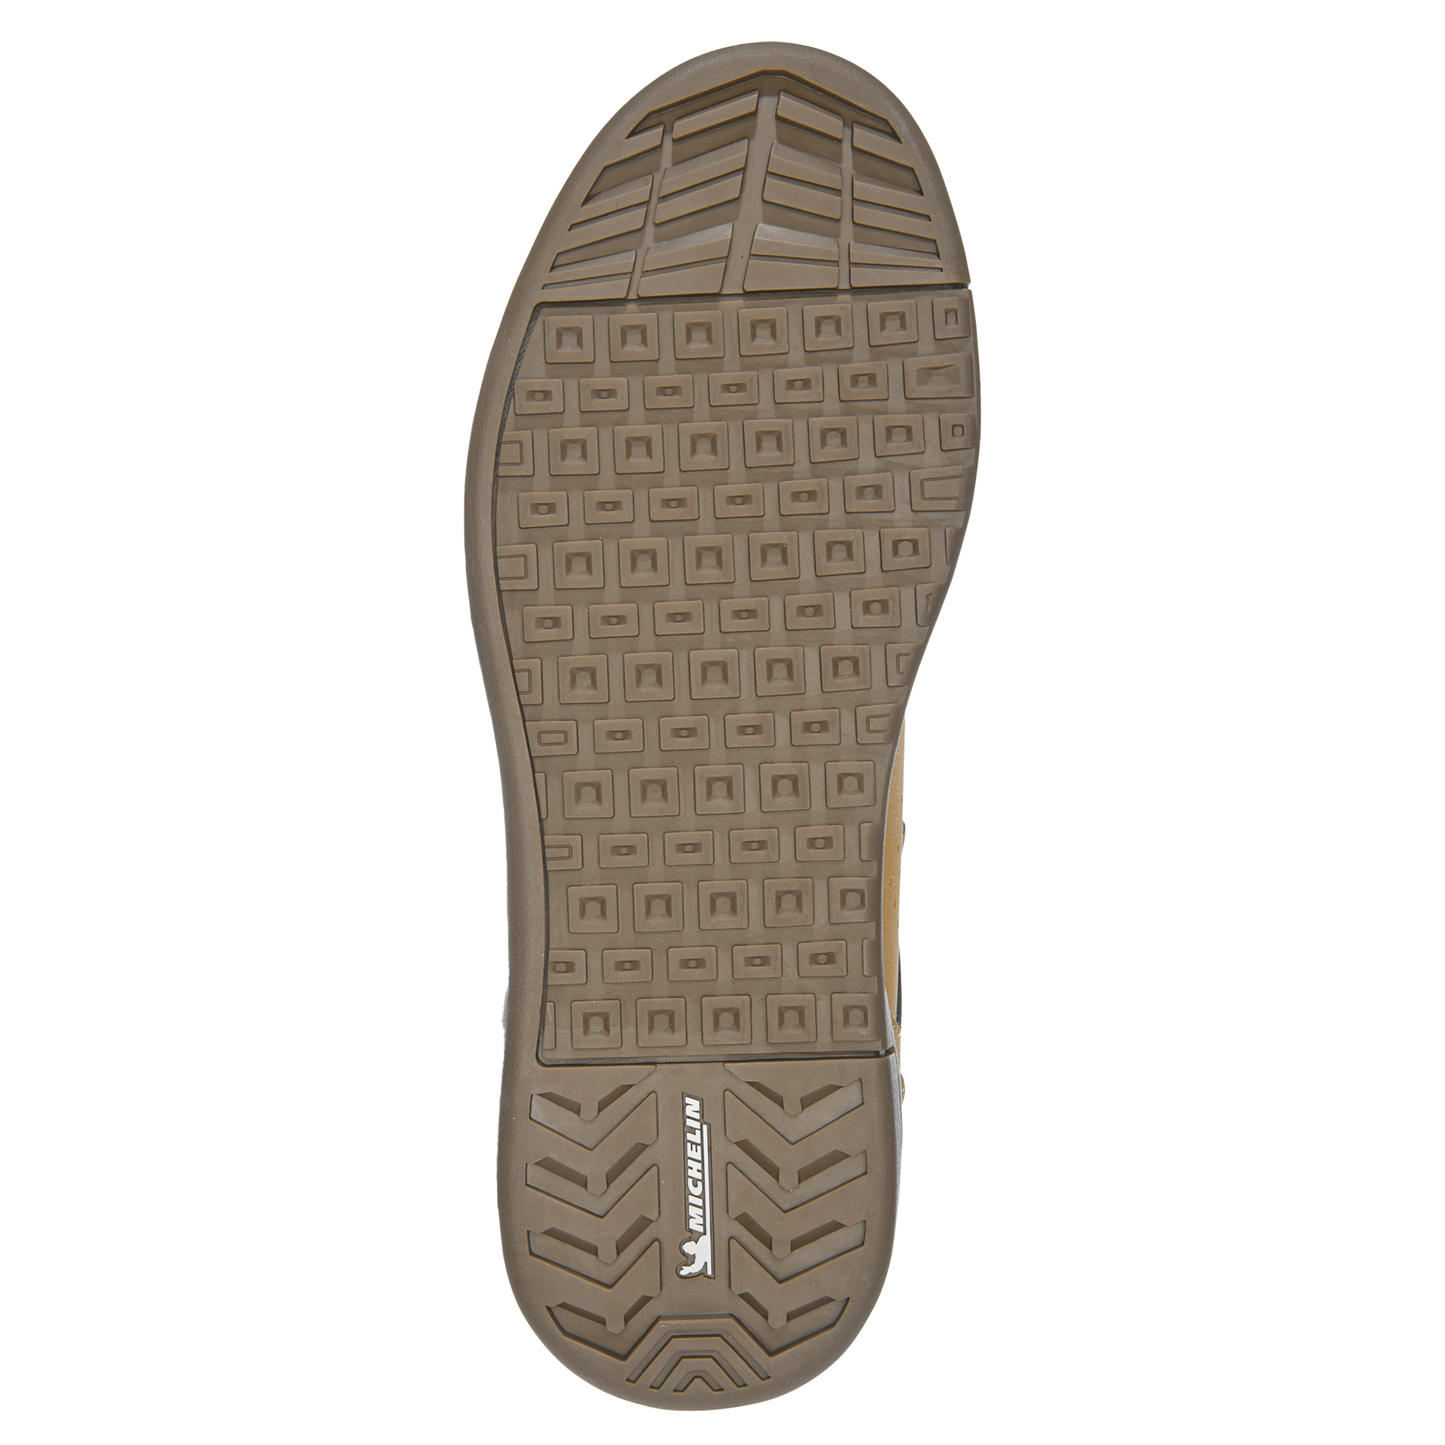 Etnies Camber Mid Michelin x TFTF Flat Shoes - US 10.0 - Tan - Gum - Image 4